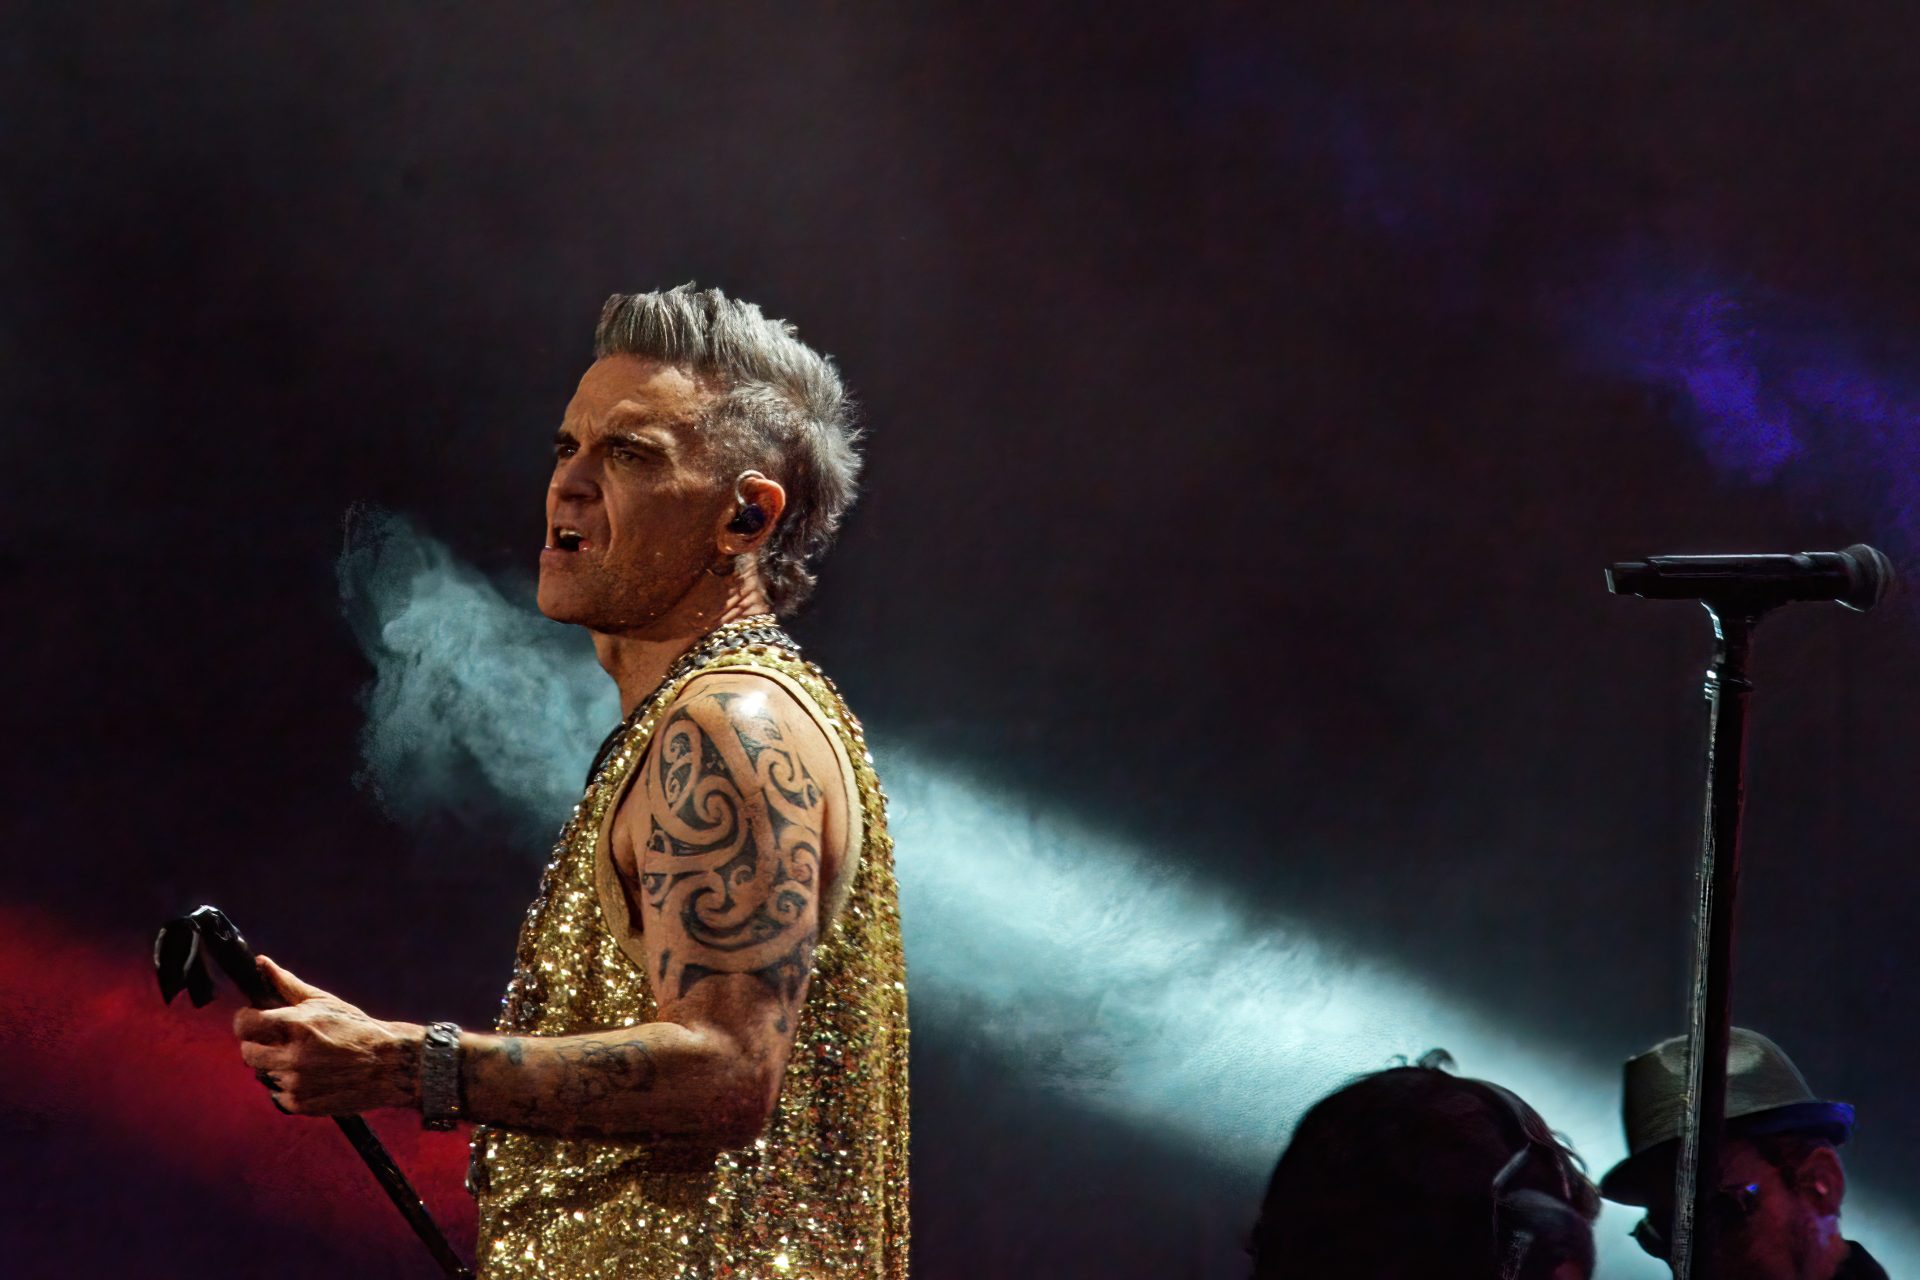 Robbie Williams expresses his sadness during Melbourne show